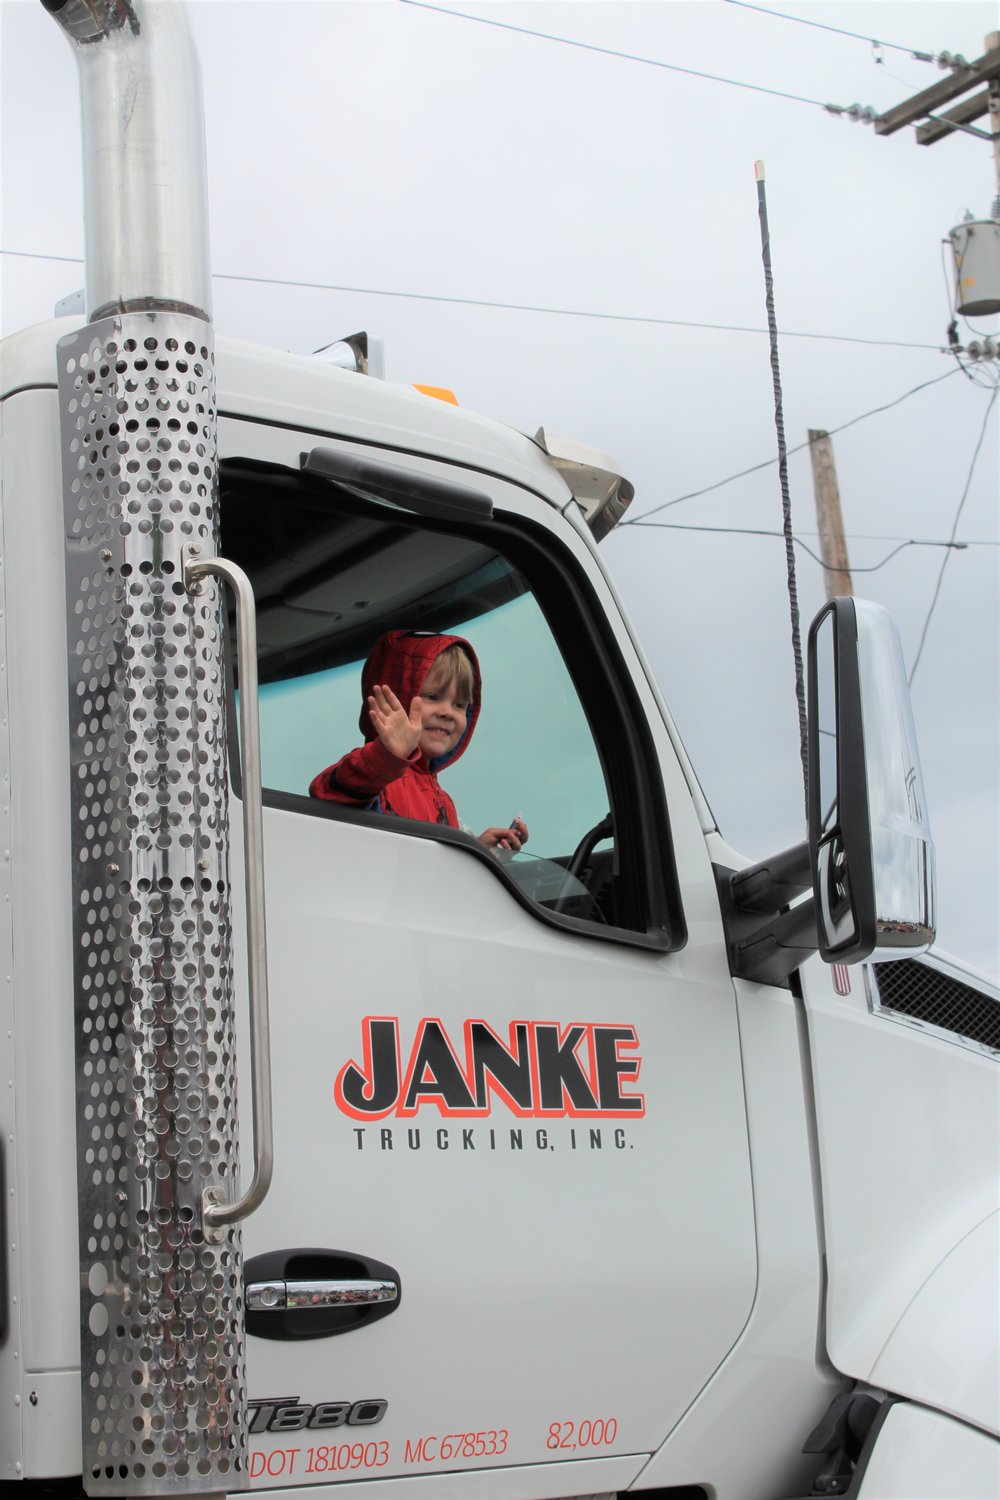 Malachi Merrill, 5, waves from one of a handful of Janke Trucking, Inc. trucks in the Napavine Funtime Festival parade Saturday.